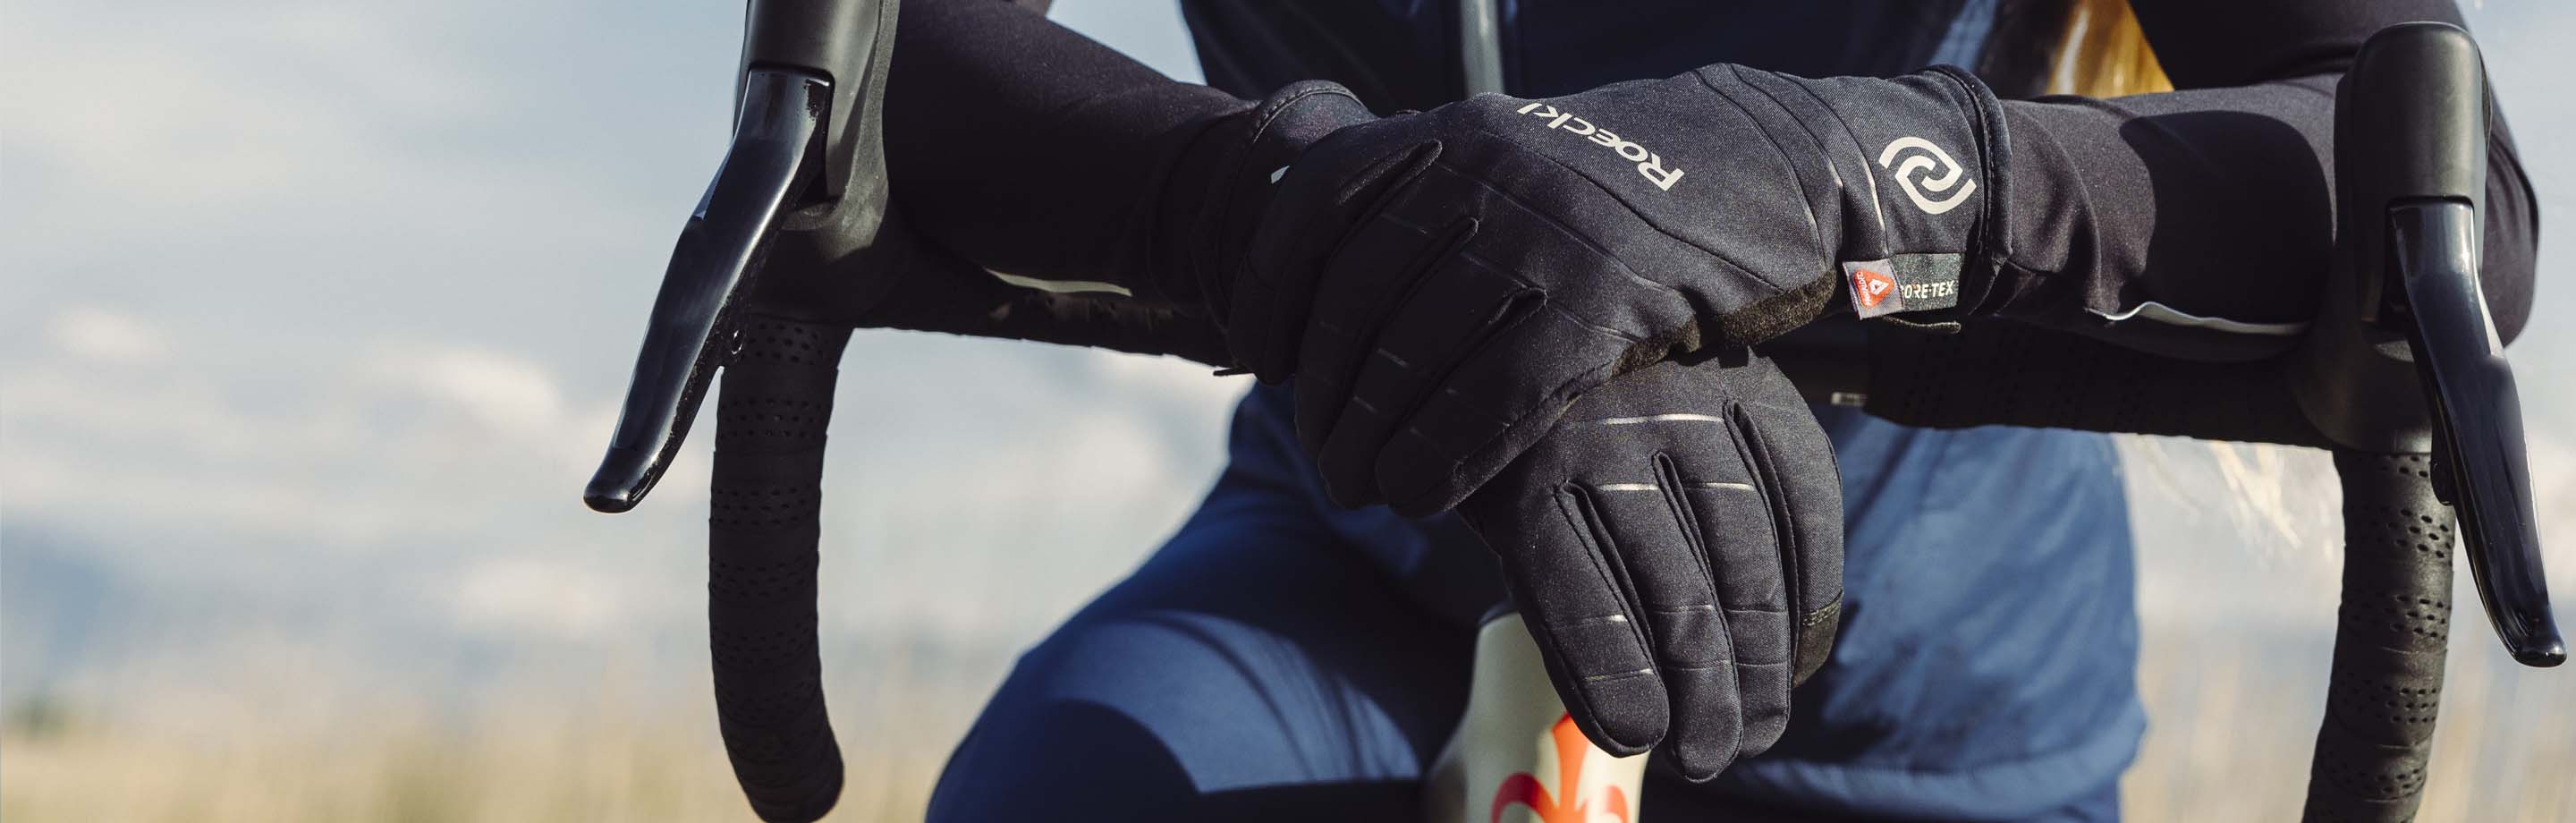 Roeckl Sports - Premium Gloves for Cycling, Cross-Country Skiing, Ski Adventure, Running and Outdoor